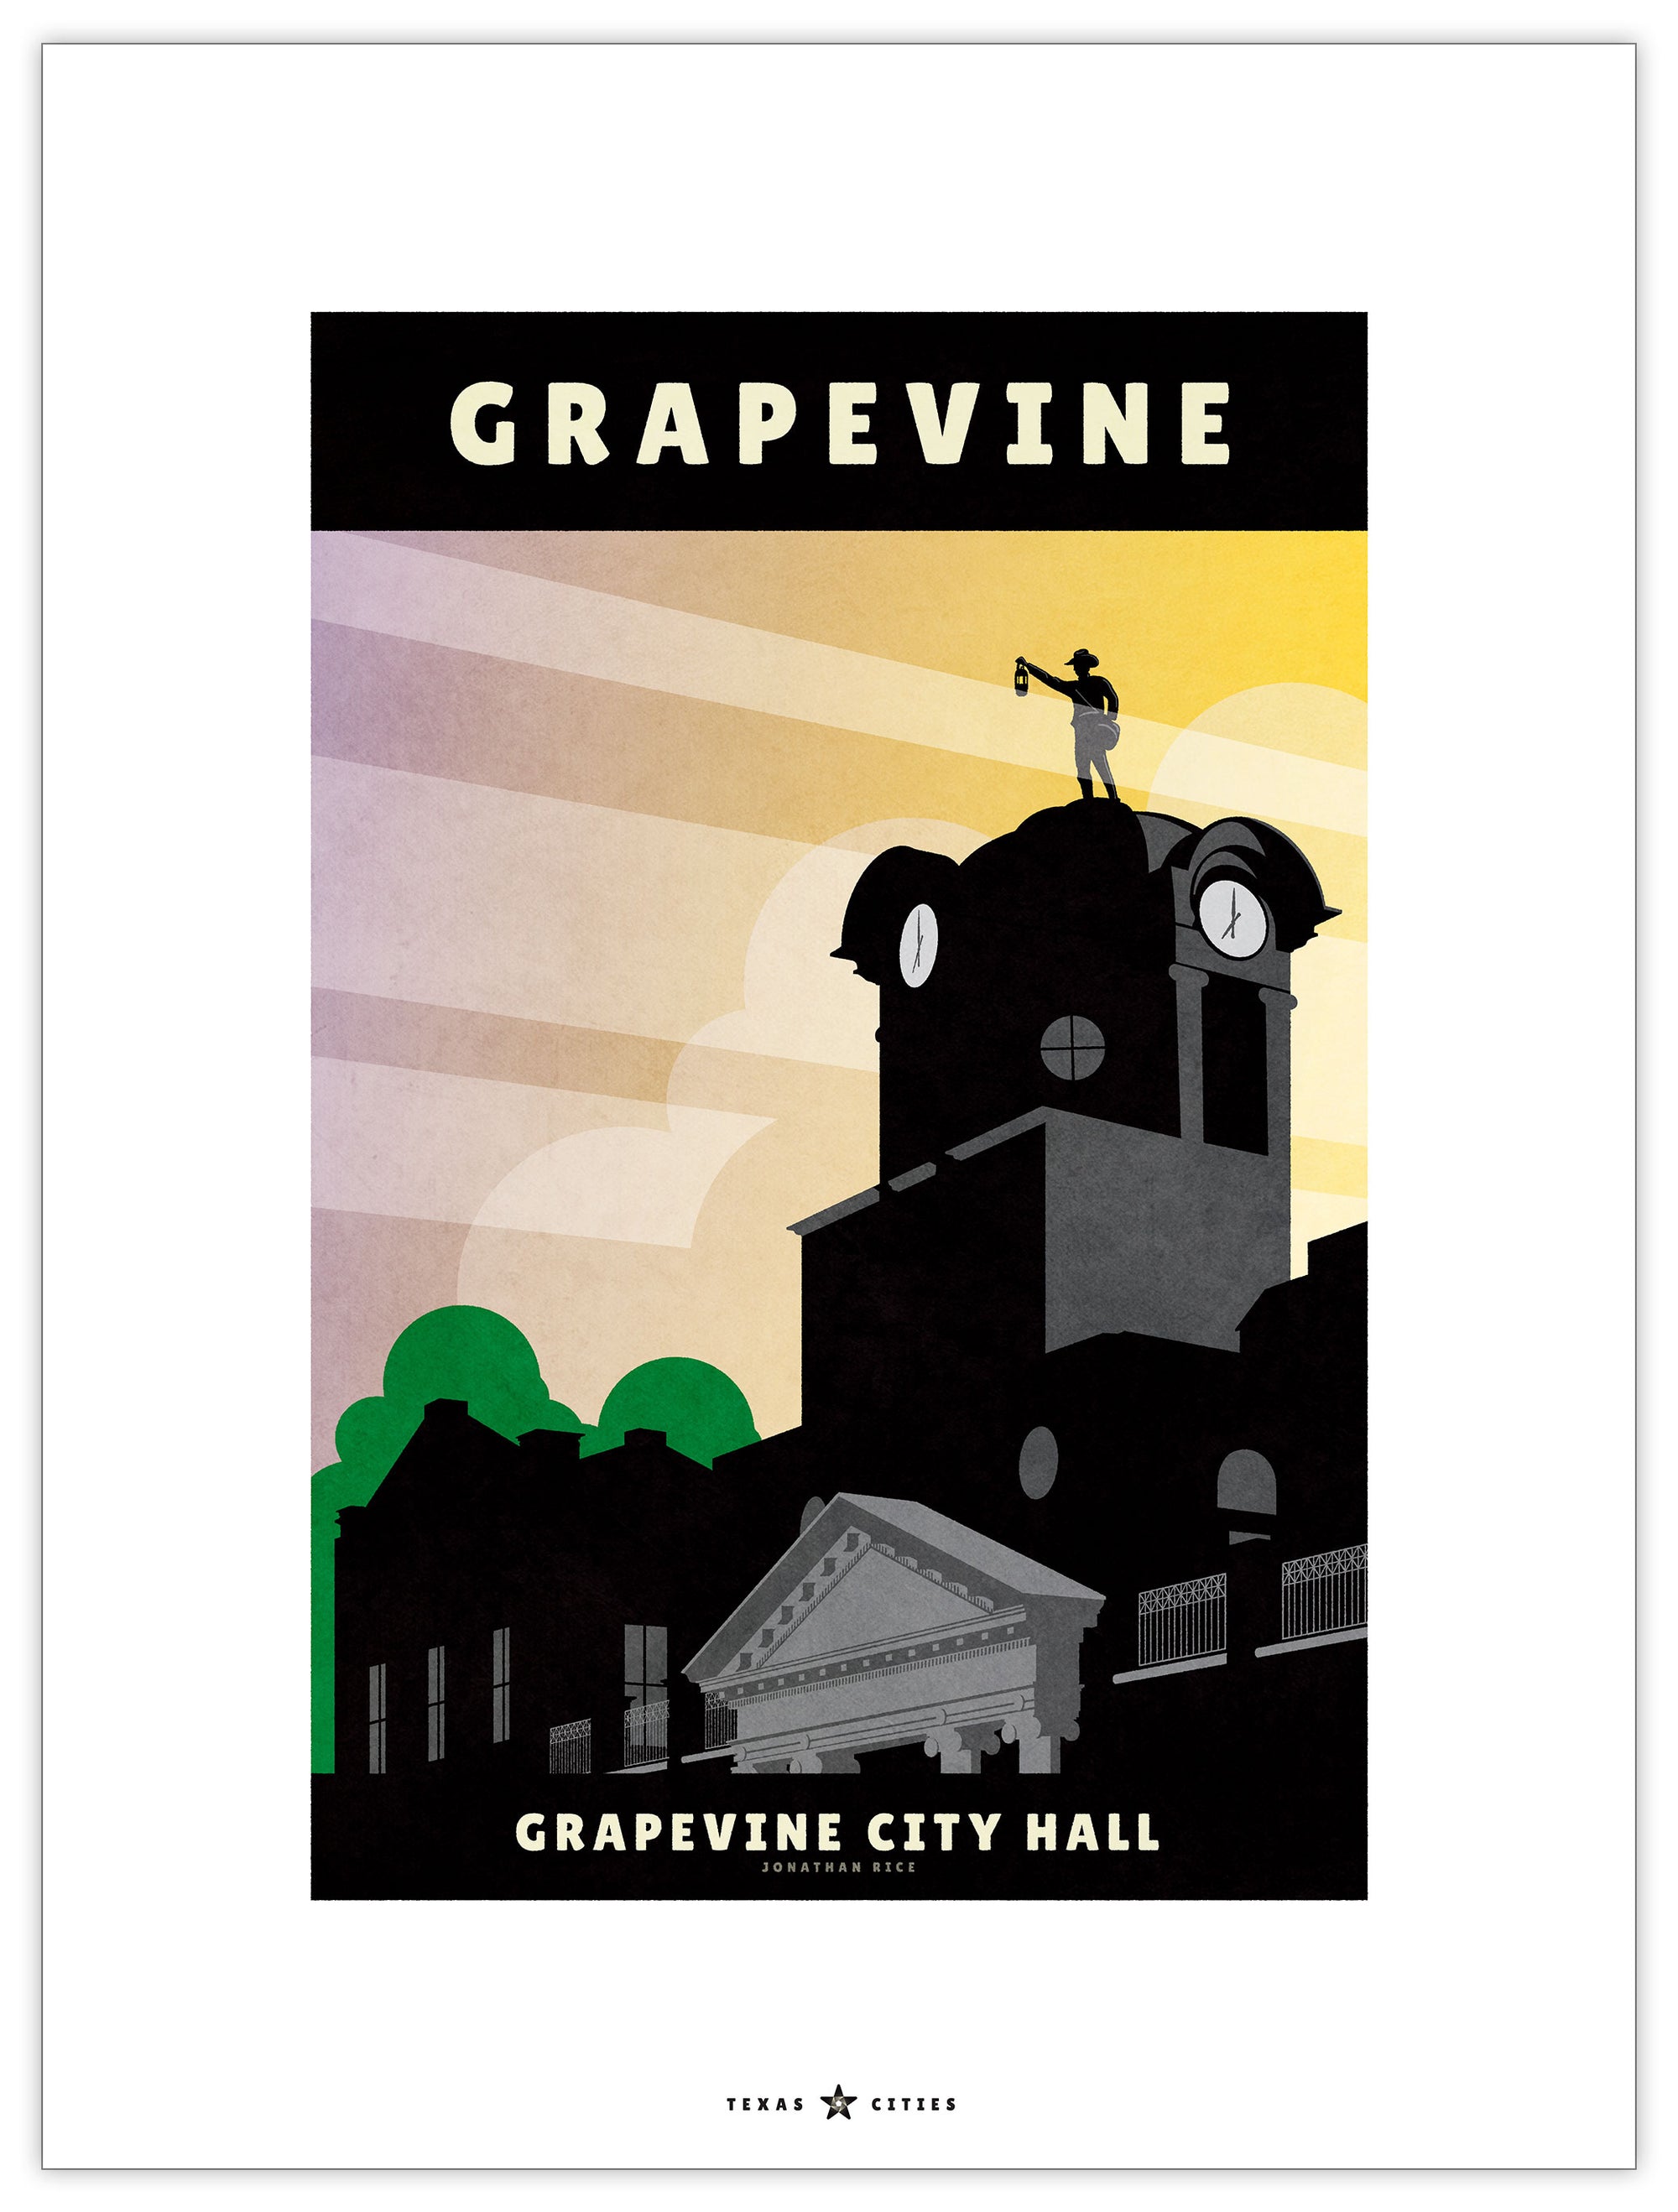 Giclée art print and travel poster of the City Hall building in Grapevine, Texas, featuring clock tower, with sculpture of cowboy holding lamp with sunset rays in background.